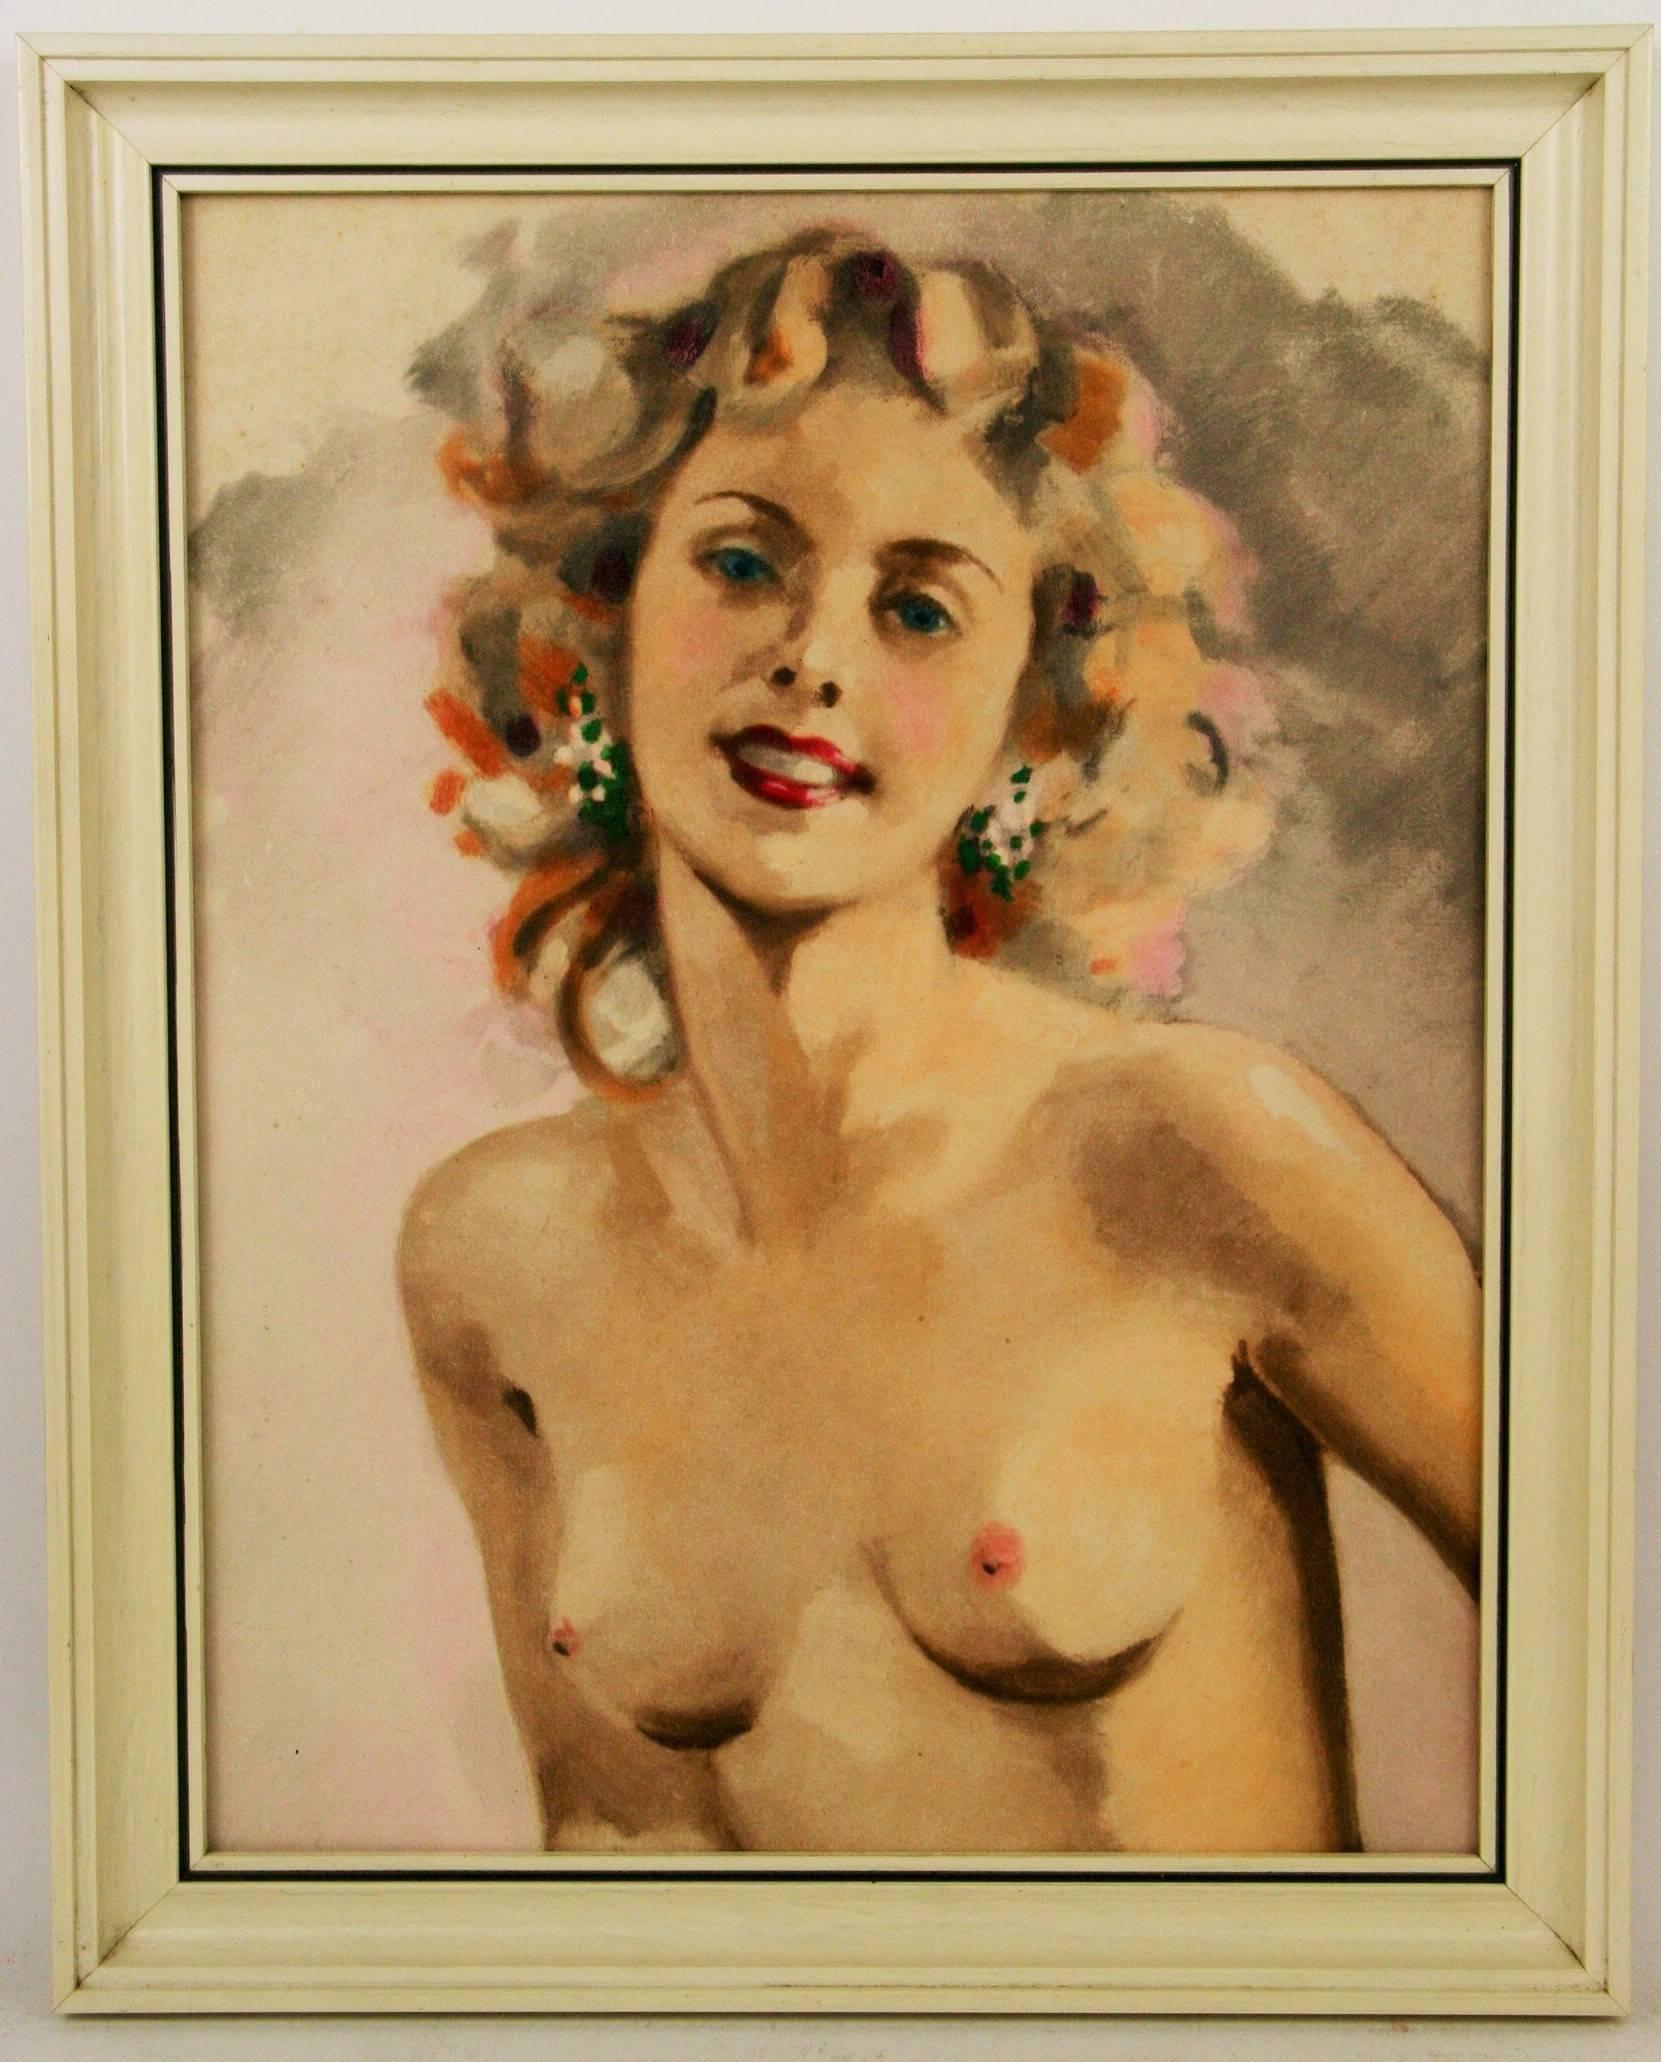 Unknown Figurative Painting - Pin Up Nude Gouache Painting